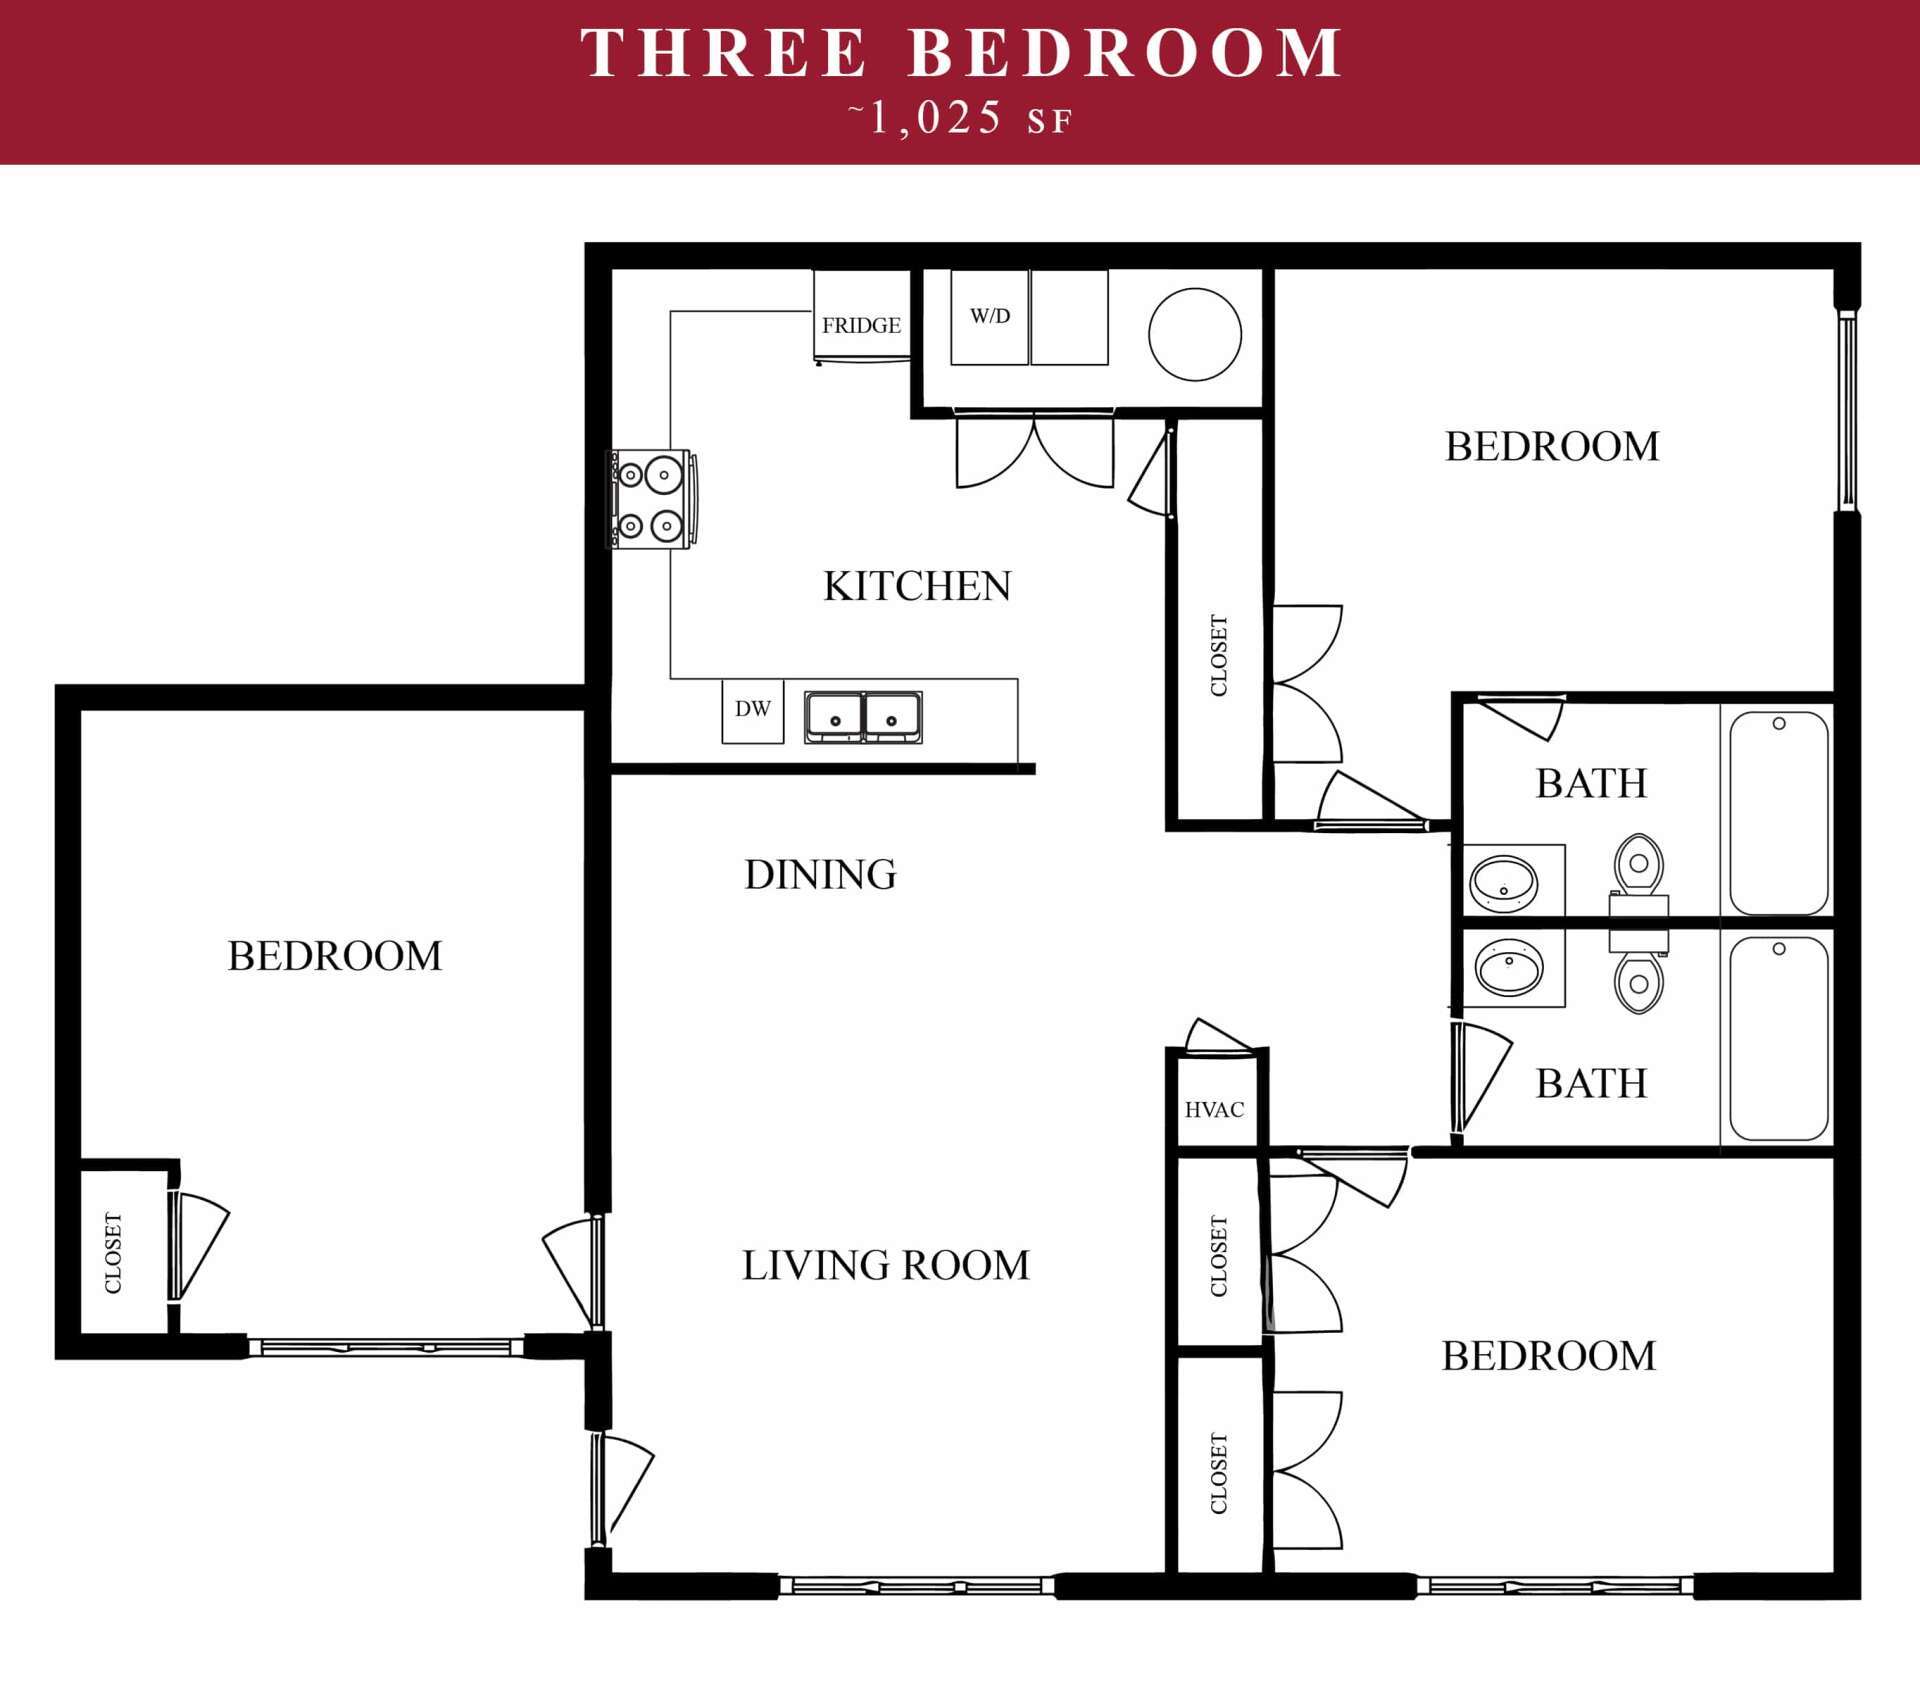 3 bedroom floor plan offering 1,025 sq. ft. of space at Pines at Southridge Tahlequah apartments